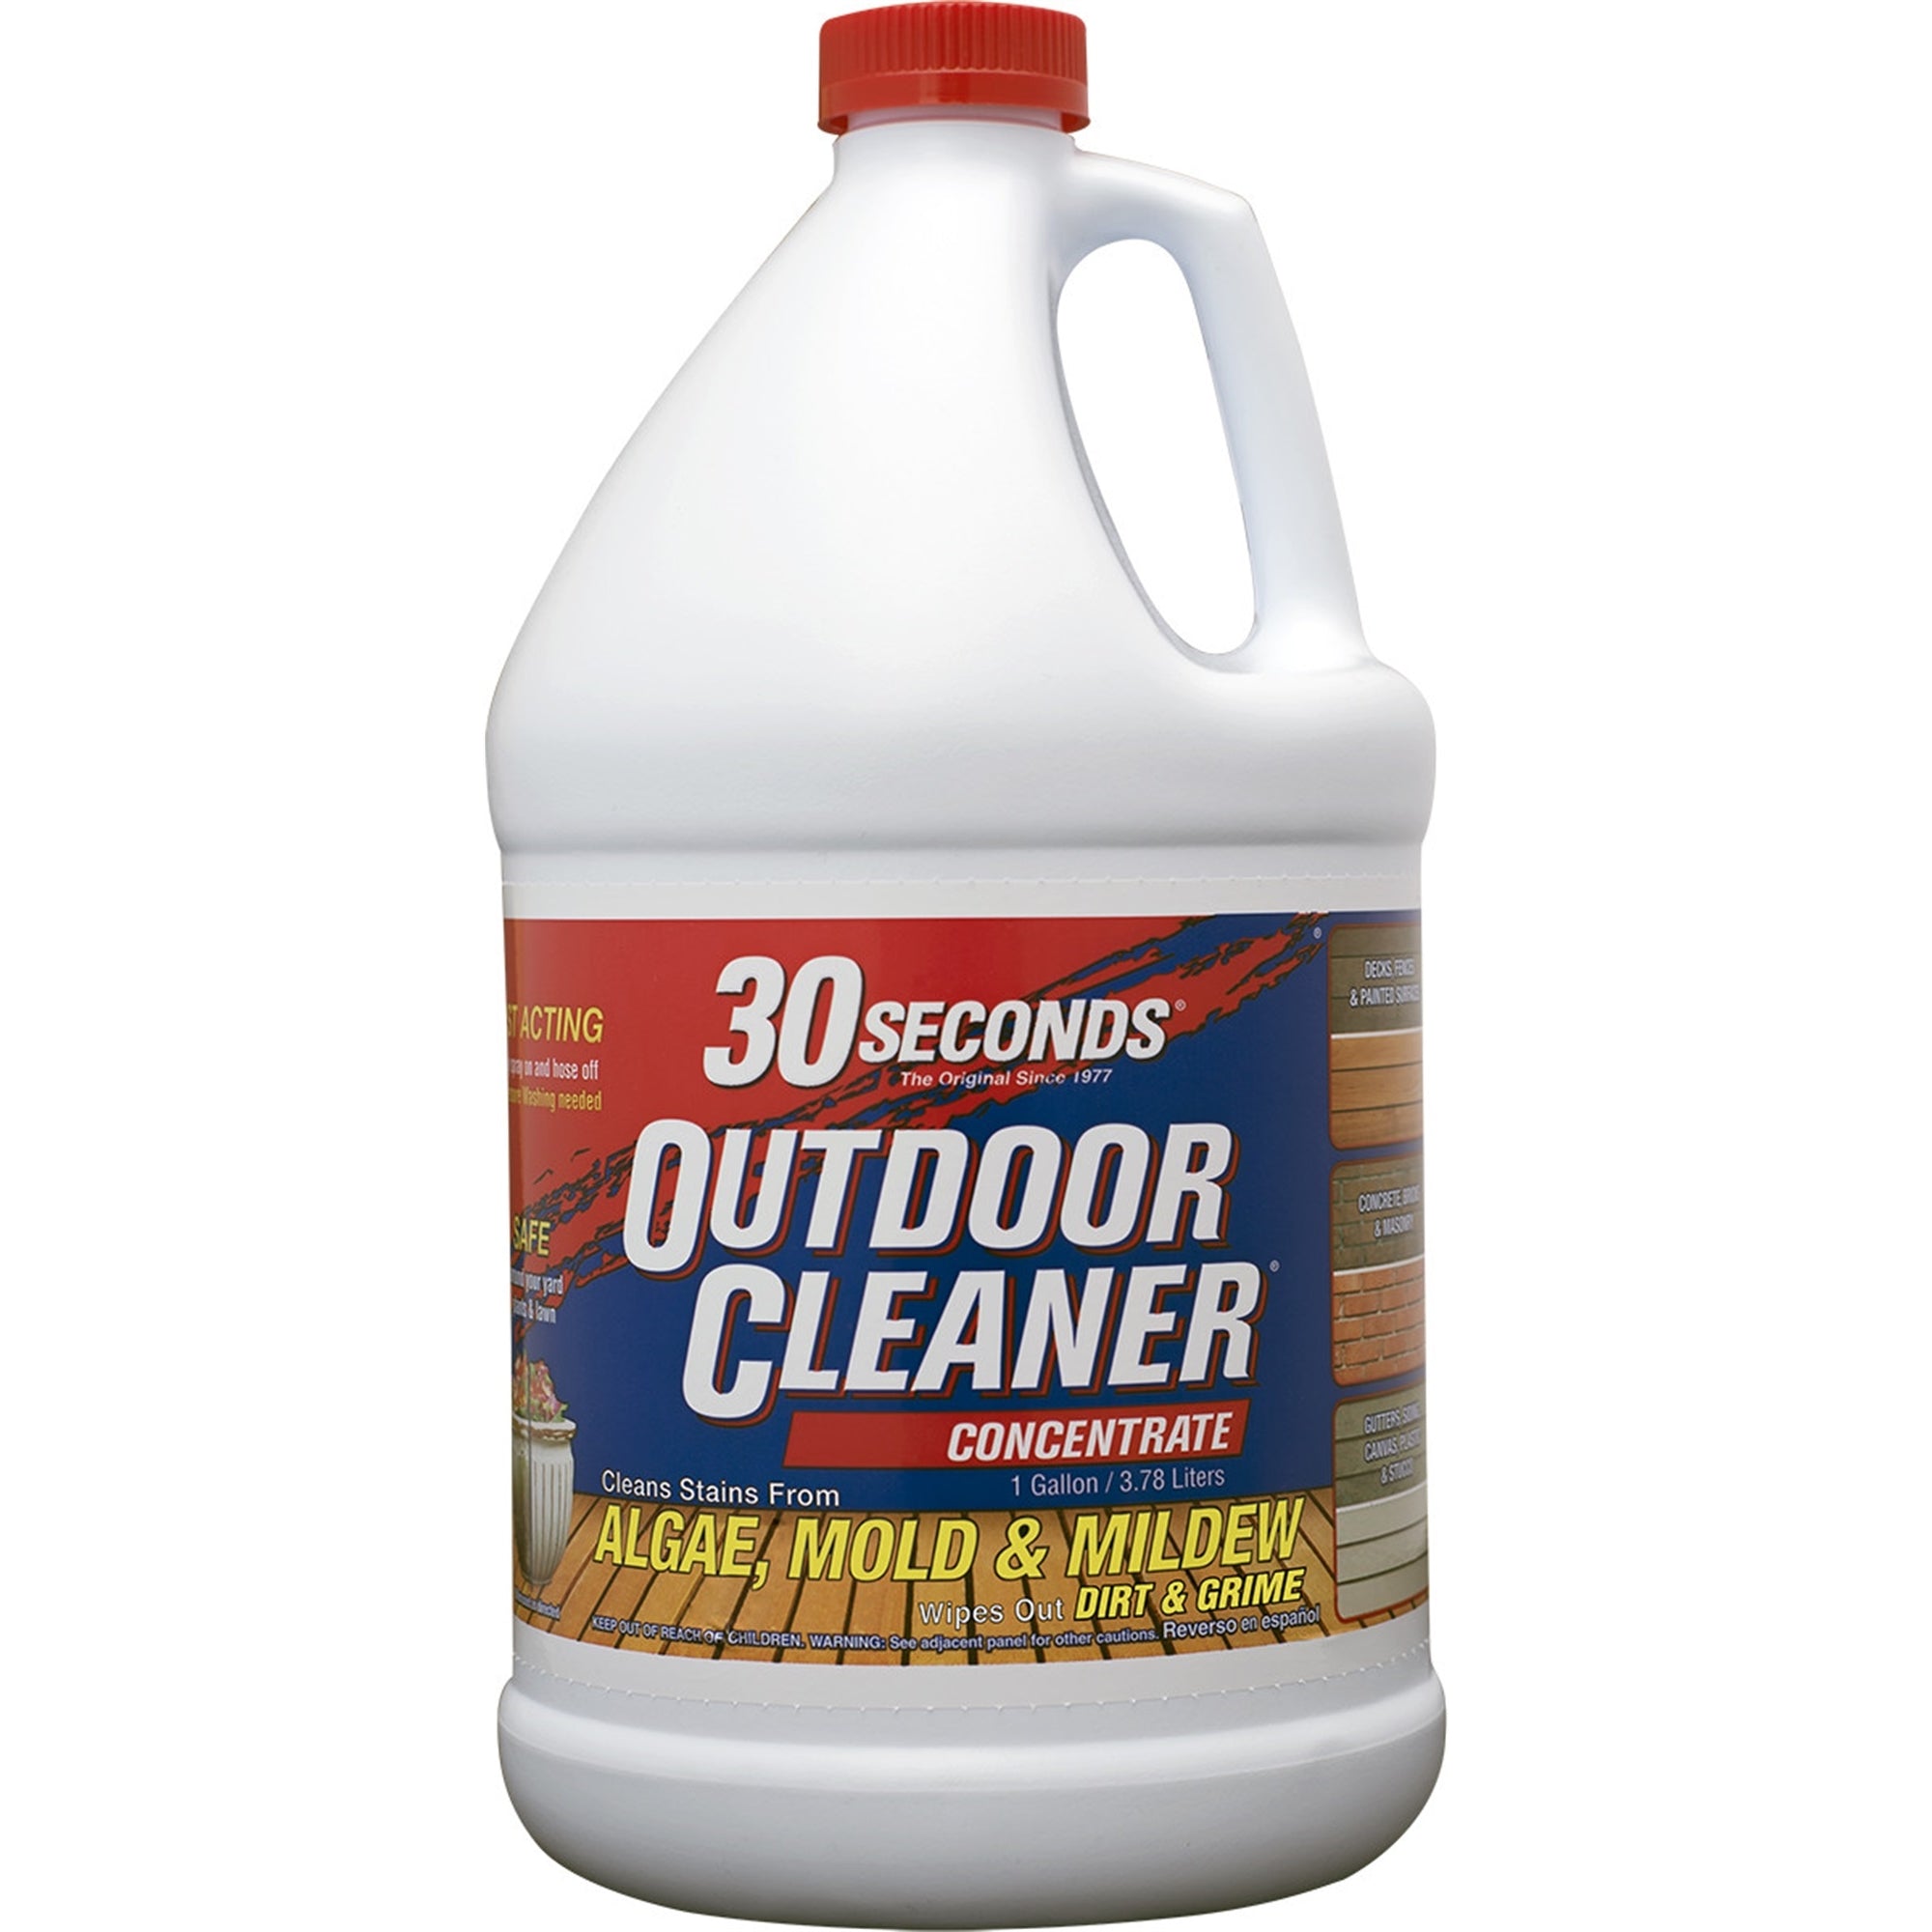 30 SECONDS Outdoor Mold, Mildew, Algae Cleaner, 1 Gallon Concentrate